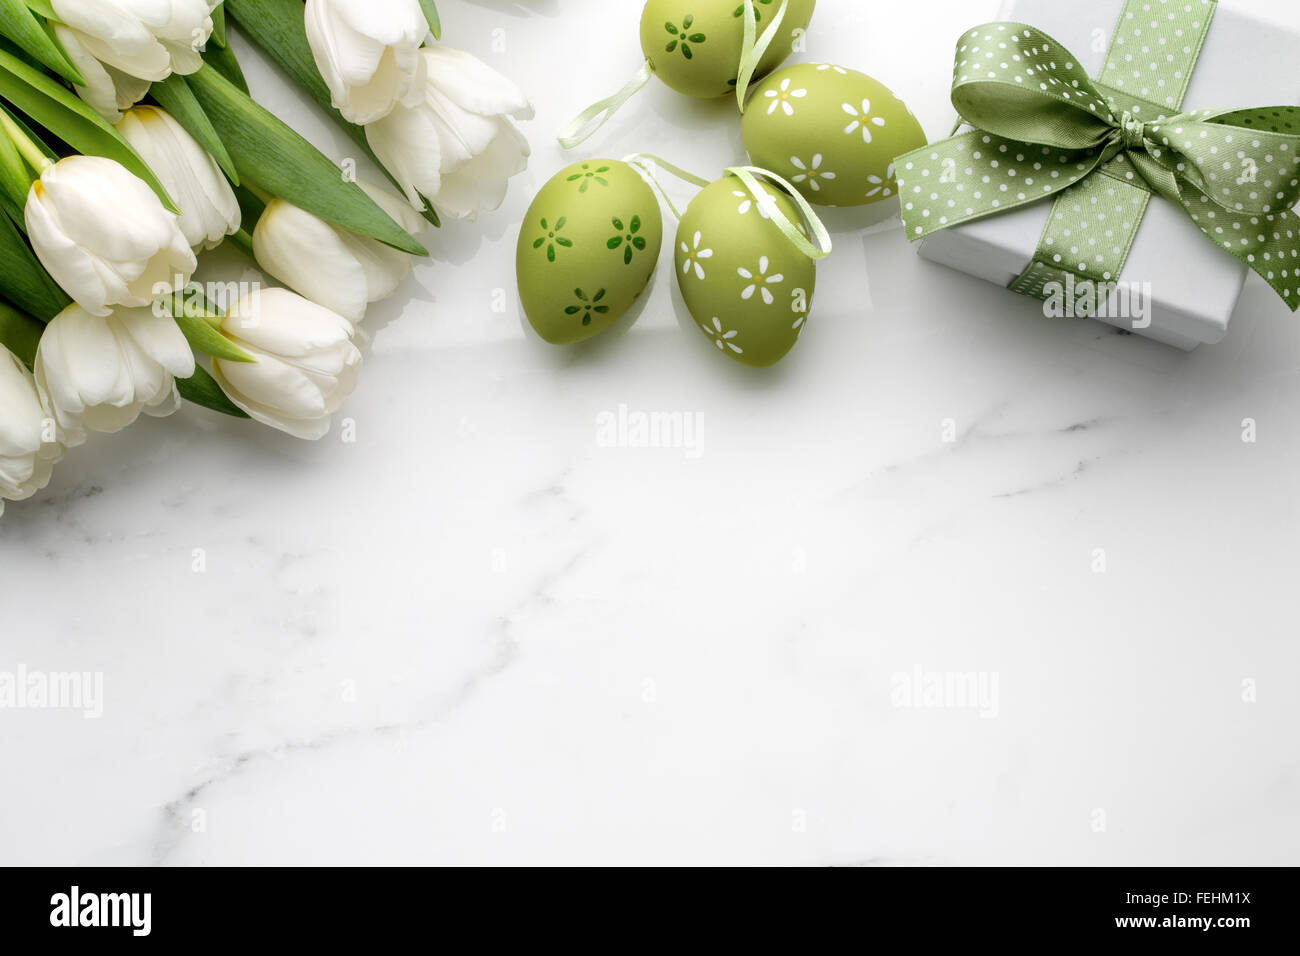 Easter eggs,tulips and gift box on white marble Stock Photo